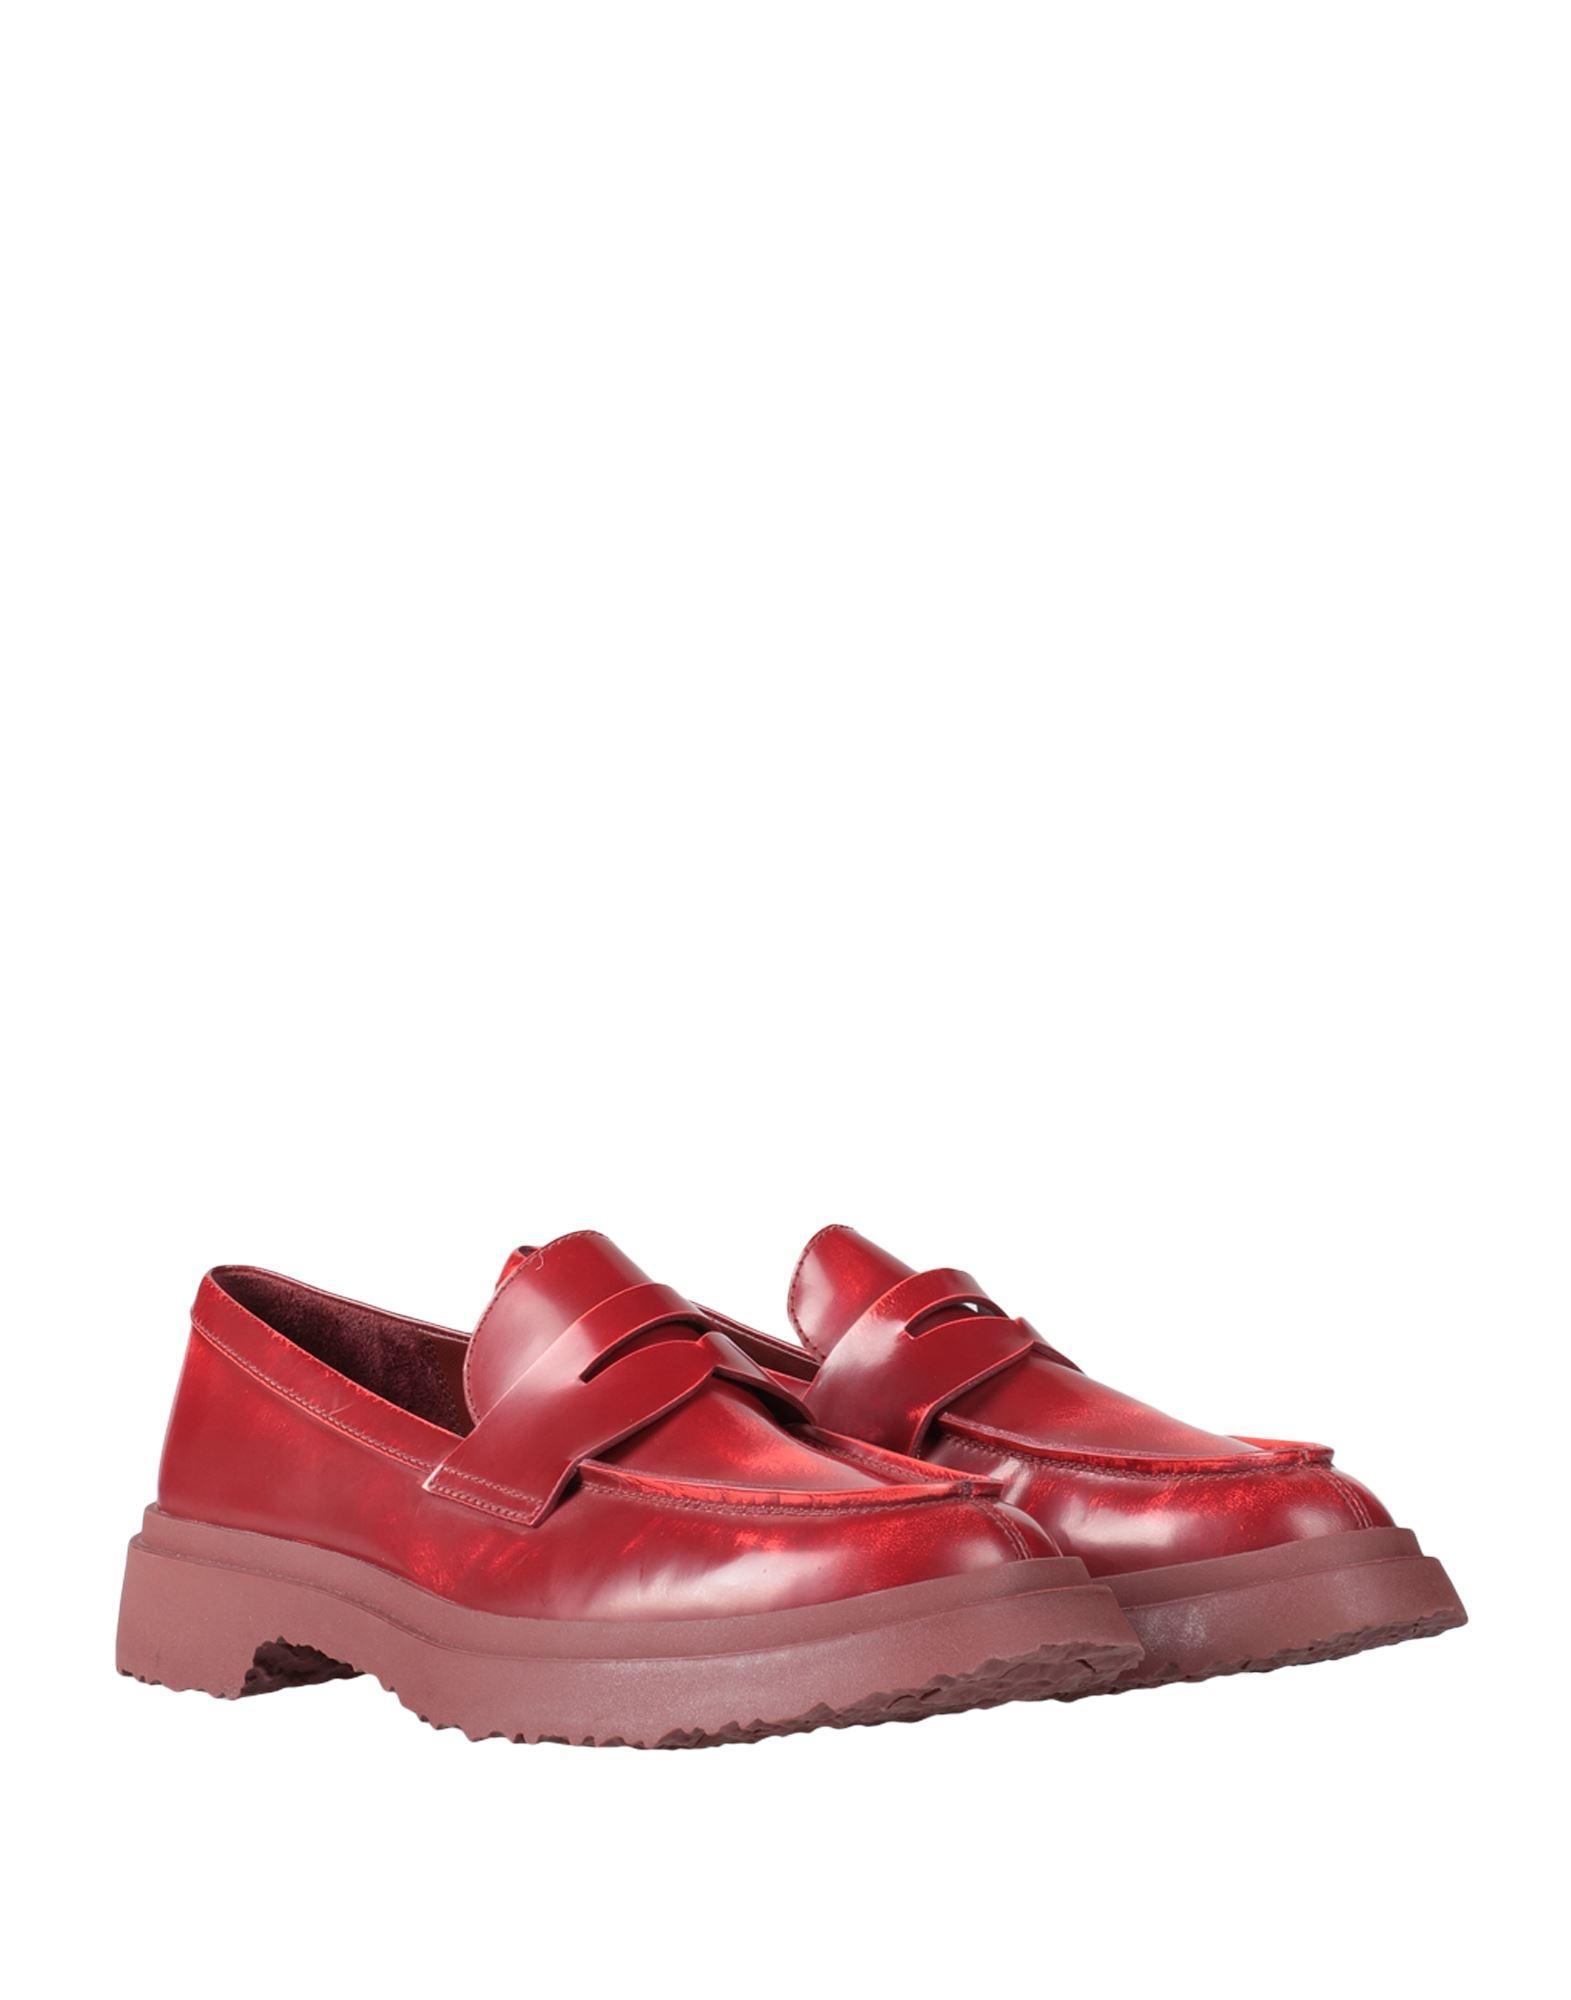 Camper Leather Loafers in Brick Red (Red) | Lyst